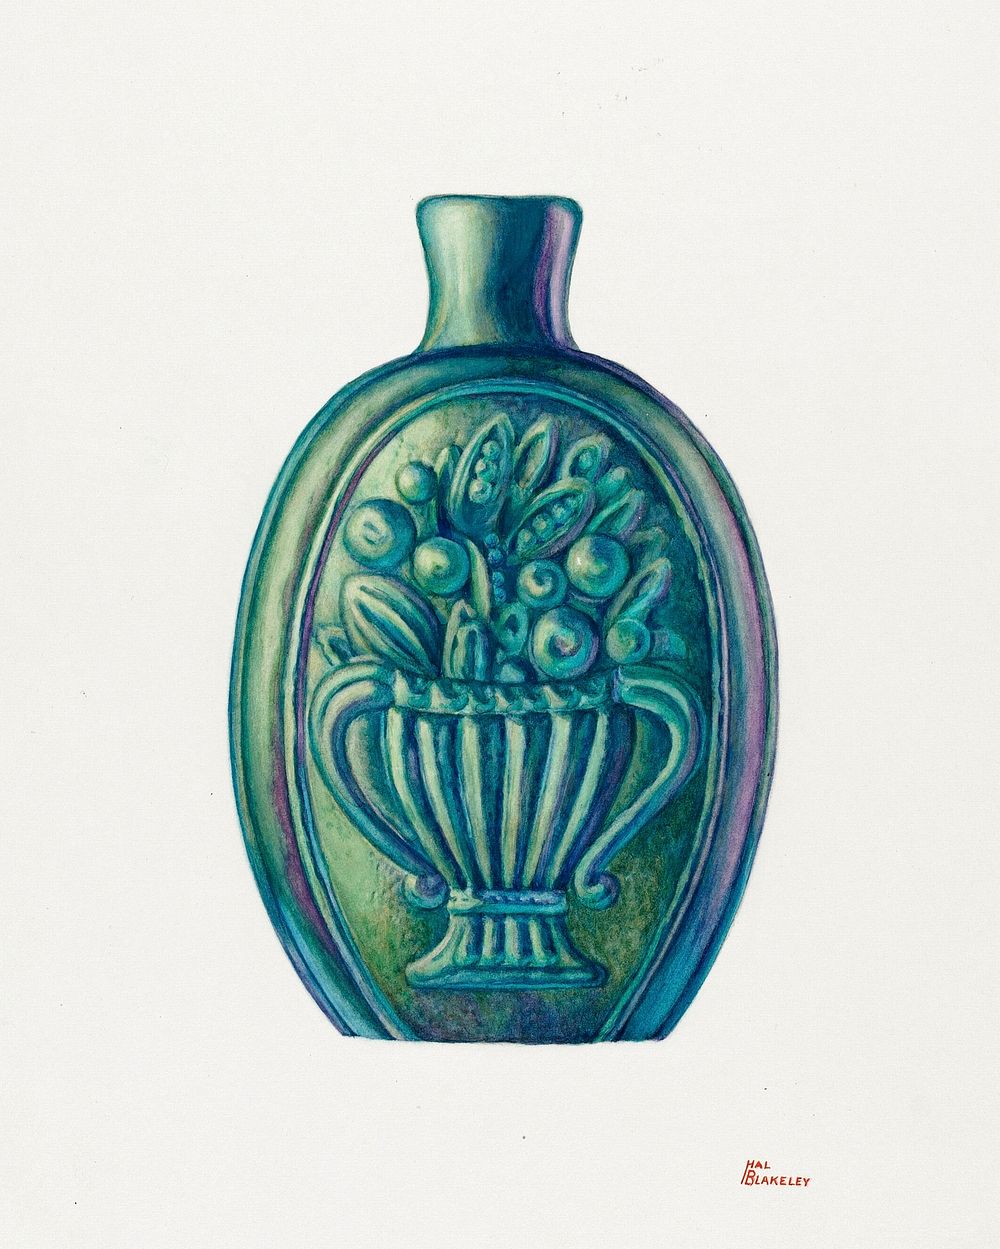 Flask (ca. 1941) by Hal Blakeley. Original from The National Gallery of Art. Digitally enhanced by rawpixel.